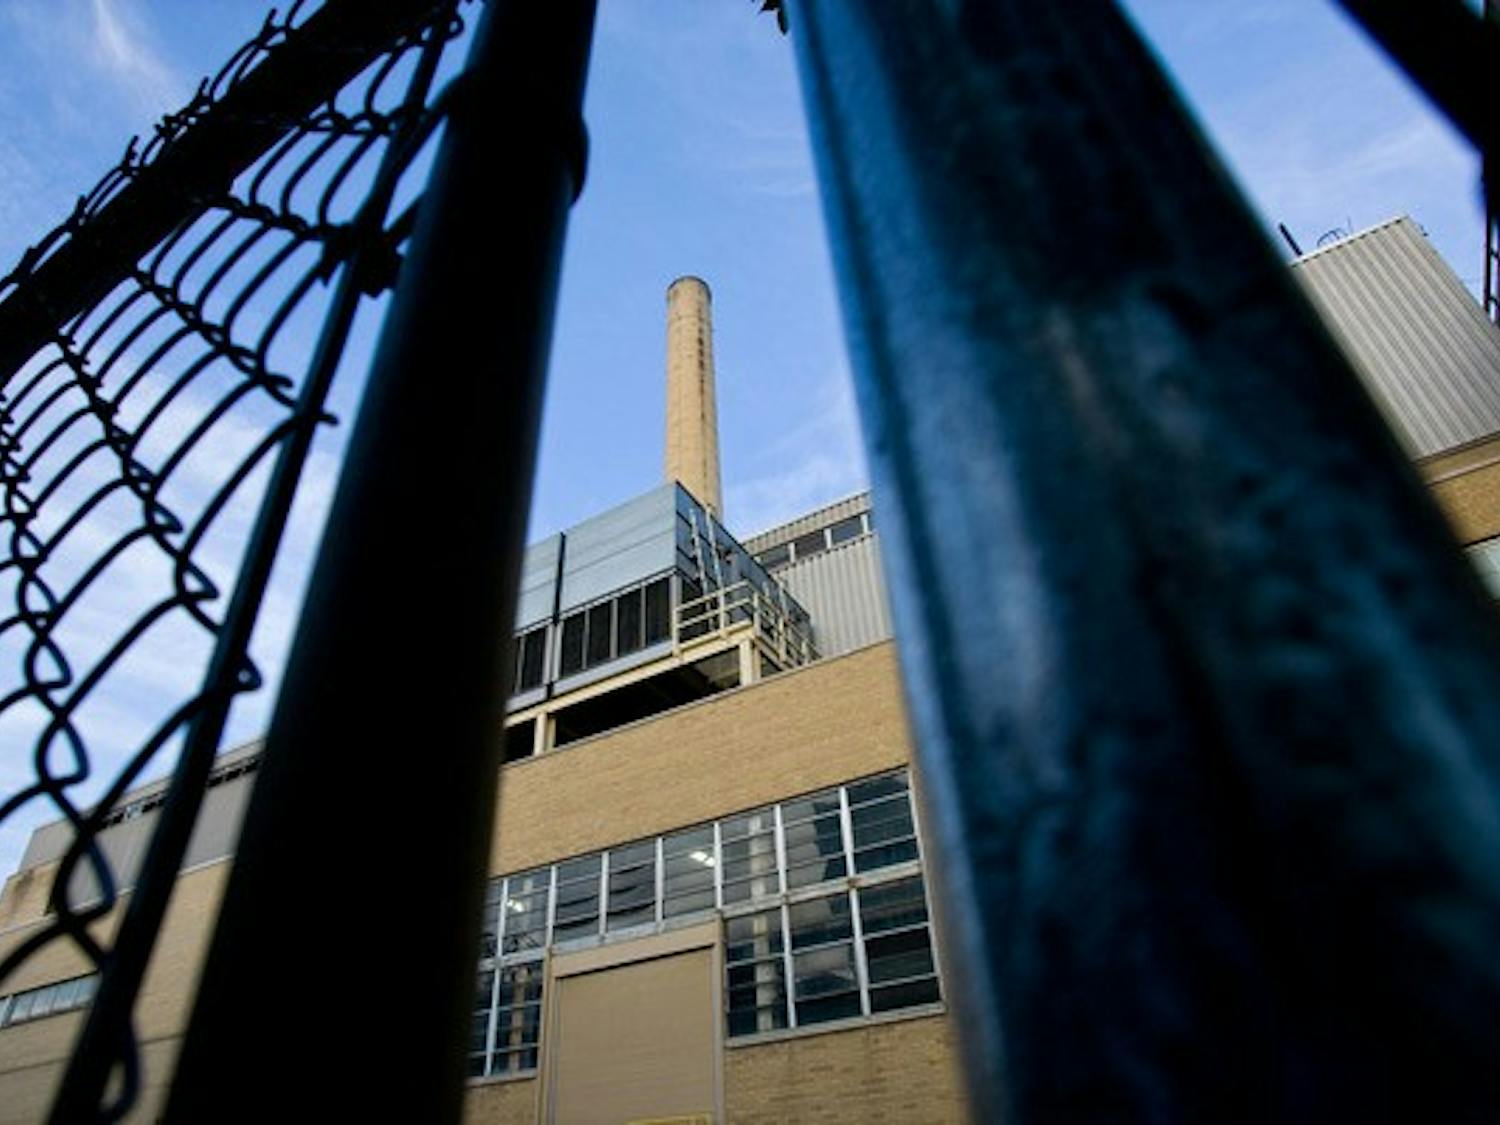 Charter heating plant to burn biomass, discontinue coal use